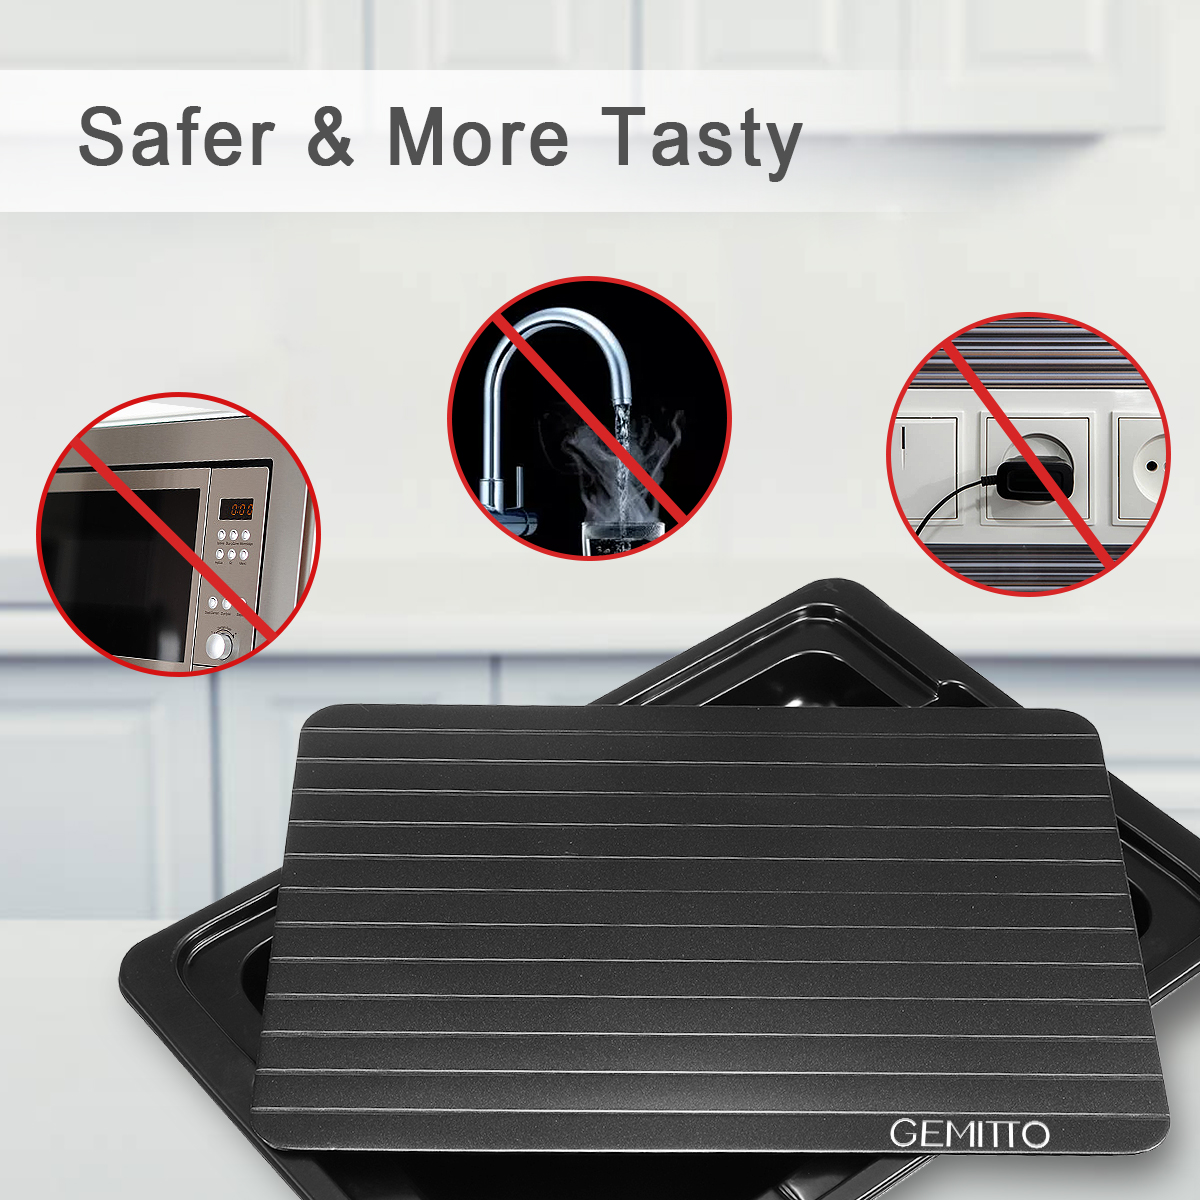 Defrosting-Tray-Thawing-Plate-Frozen-Food-Faster-and-Safer-Way-to-Defrost-Meat-or-Frozen-Food-Plate-1344447-11